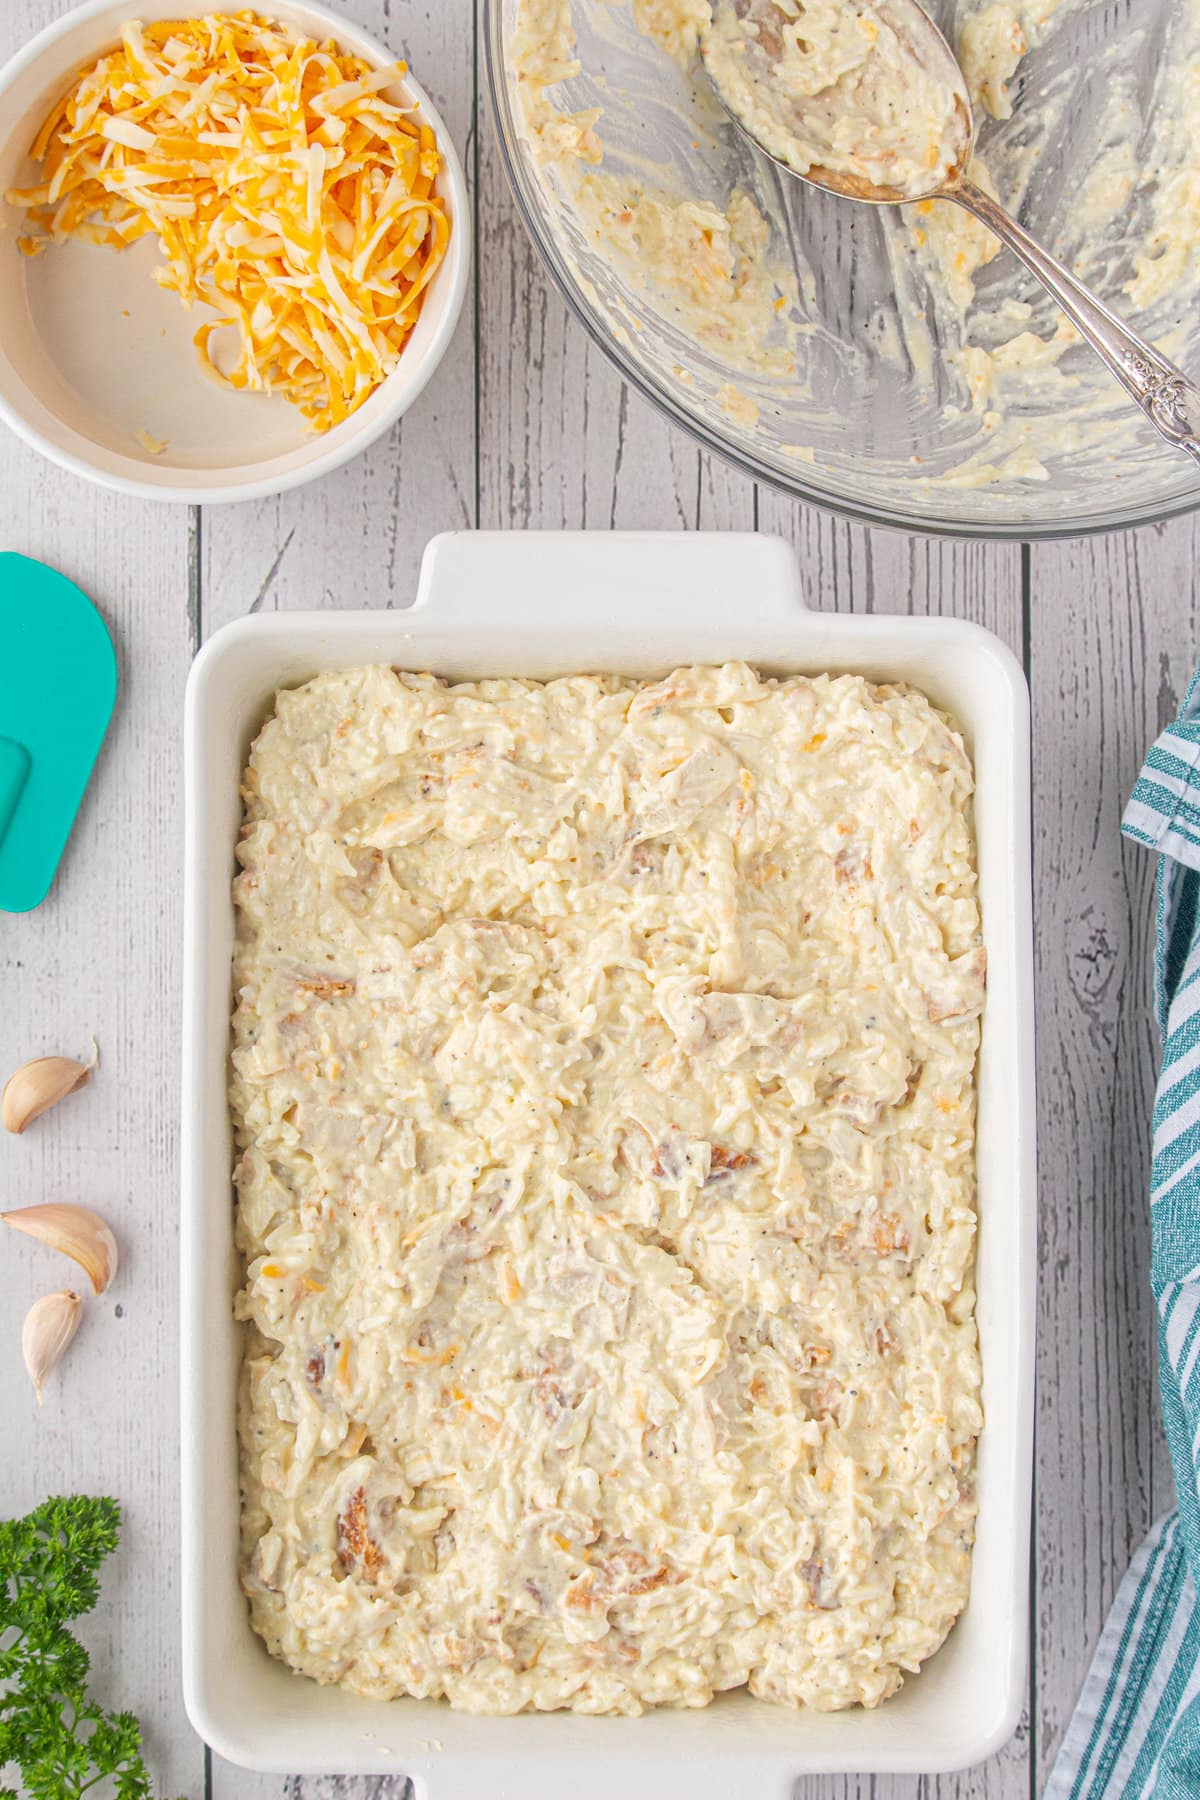 The chicken, rice, and cheese mixture spread in a casserole dish.